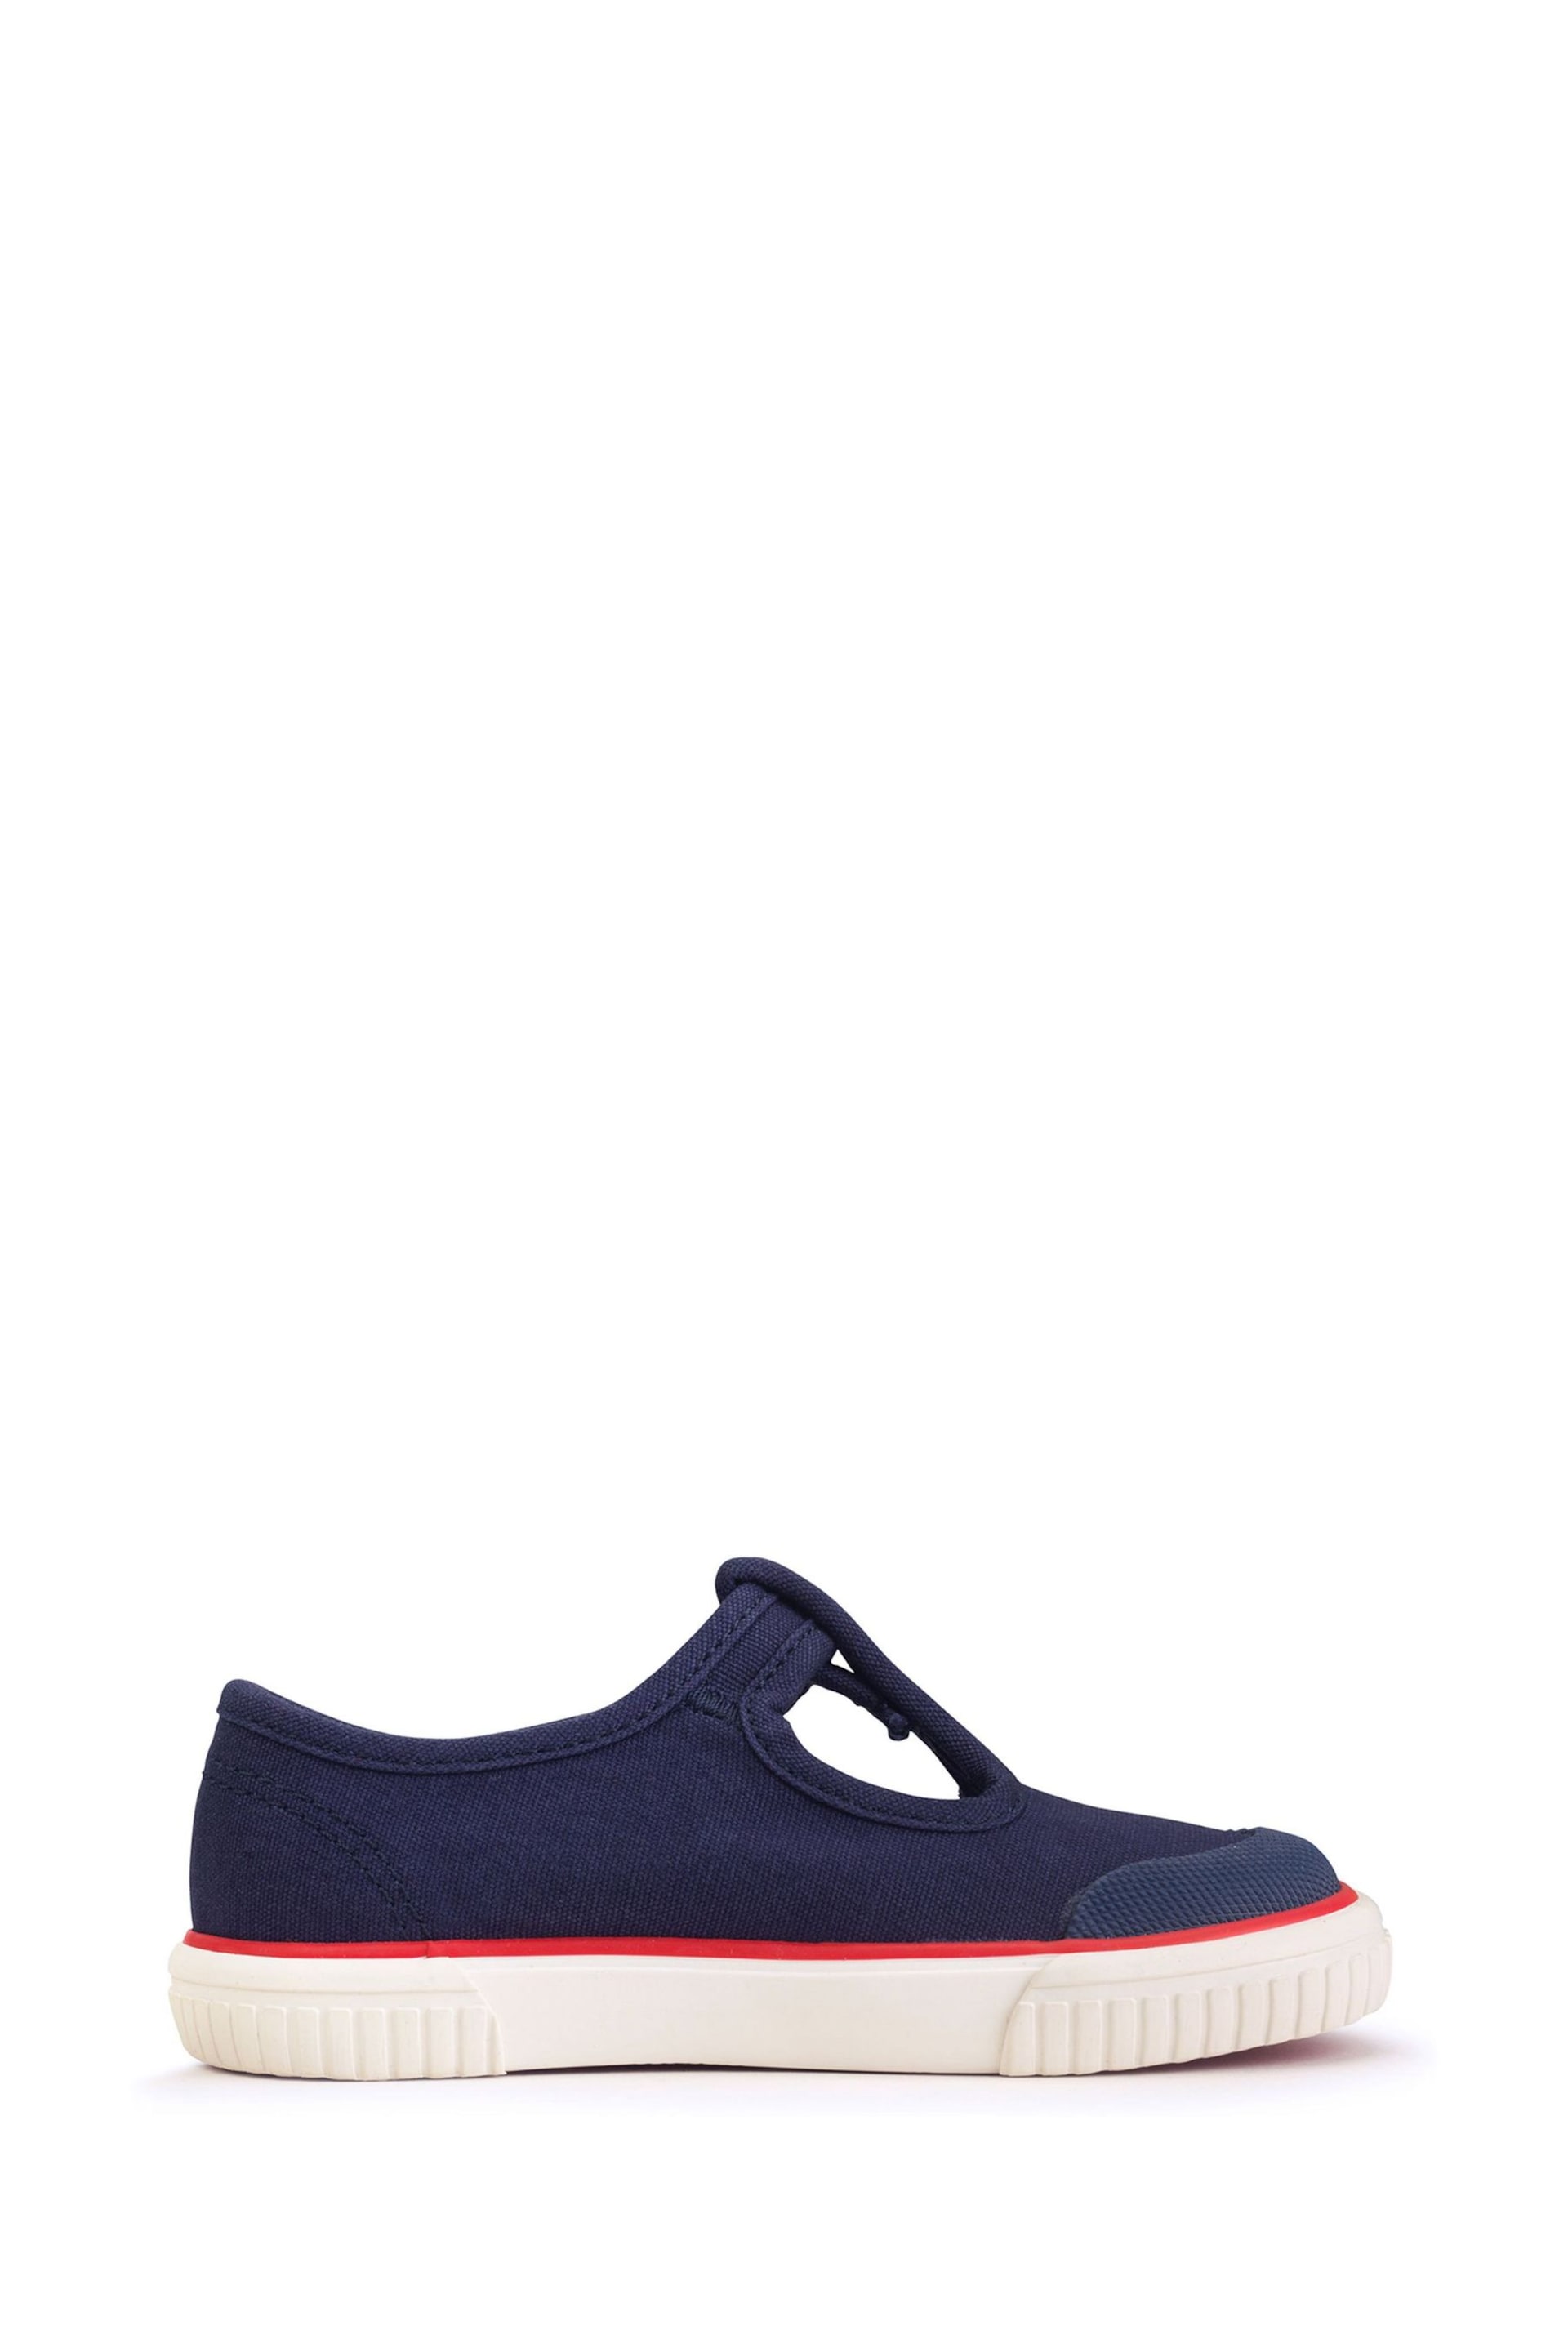 Start Rite Blue Anchor Washable Canvas T-Bar Summer Shoes - Image 3 of 6